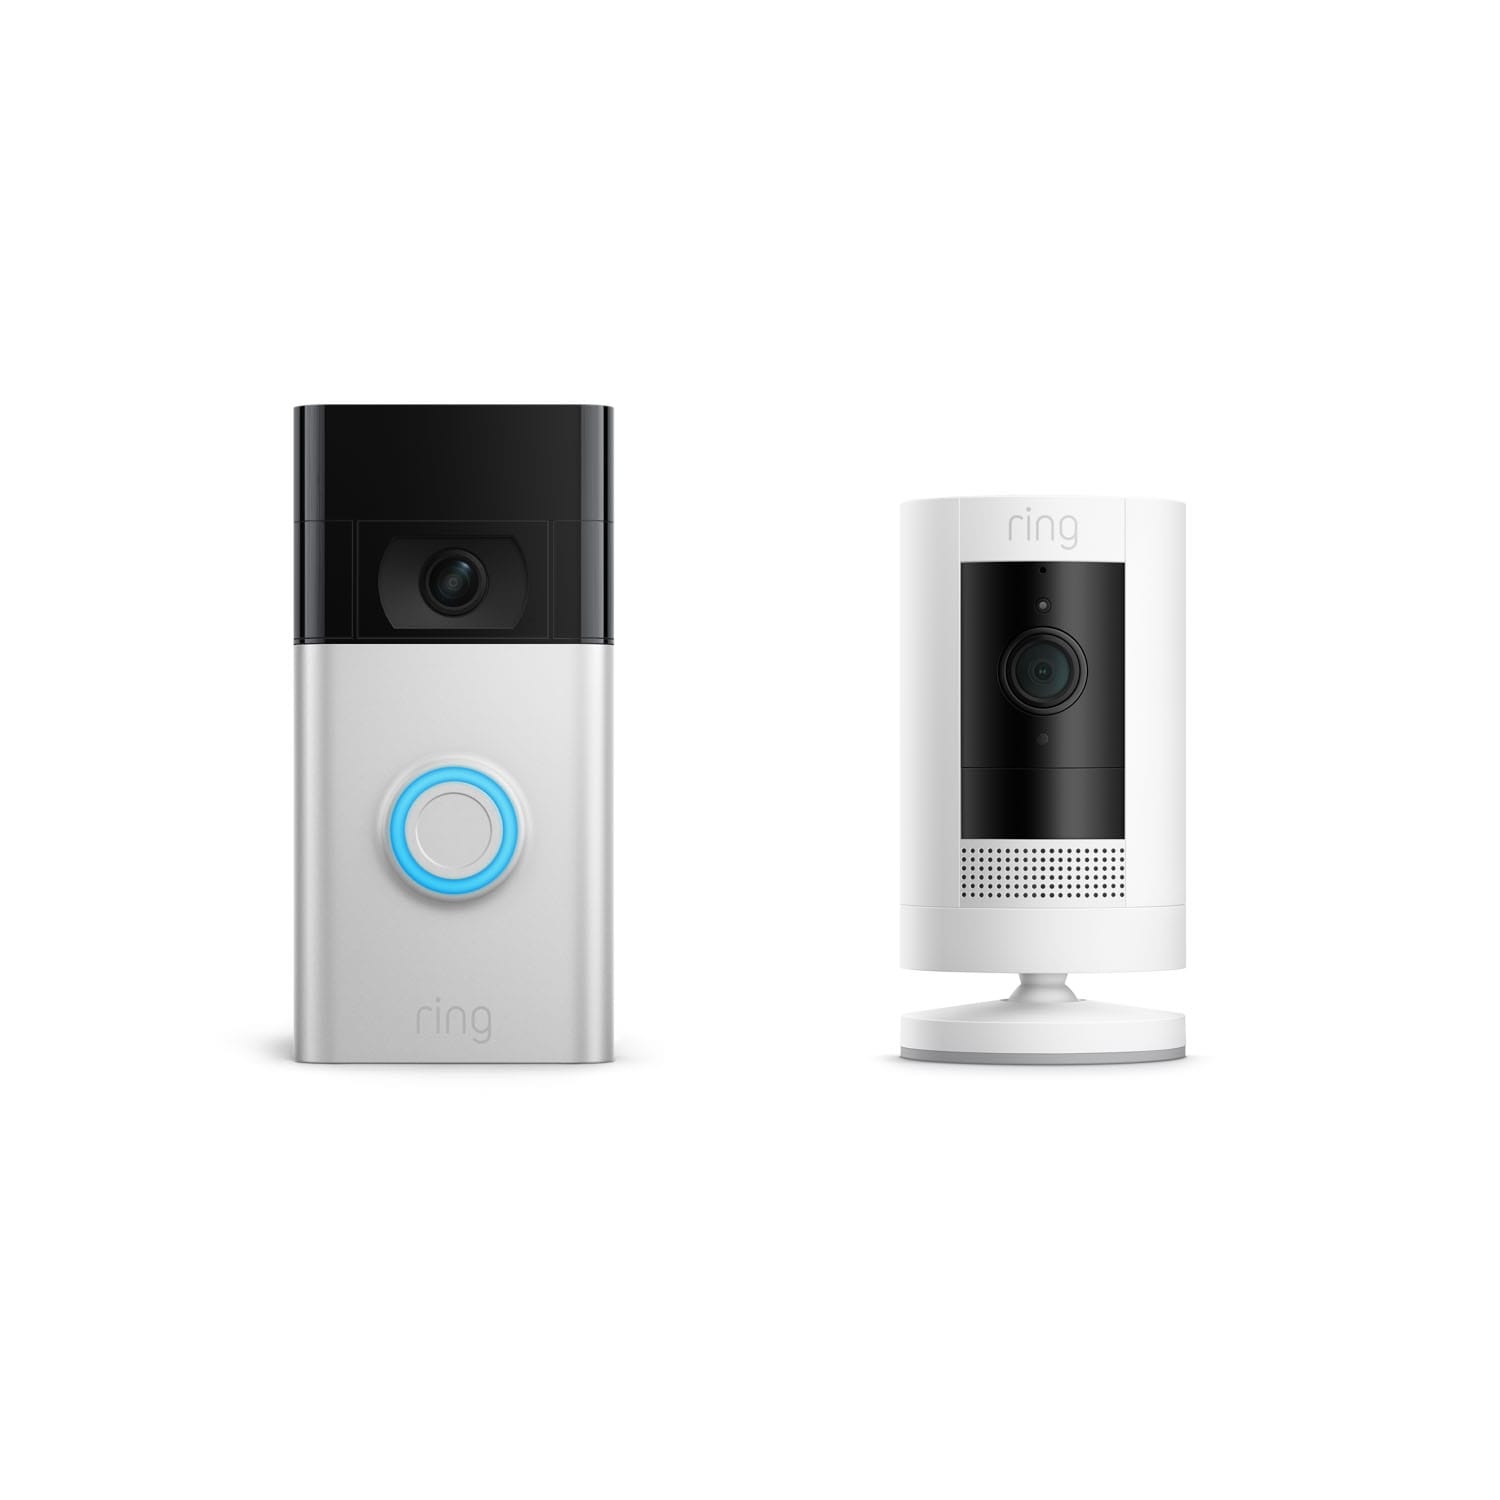 Connected Basic Kit (Video Doorbell (2nd Generation) + Stick Up Cam Battery) - Silver + White:Connected Basic Kit (Video Doorbell (2nd Generation) + Stick Up Cam Battery)